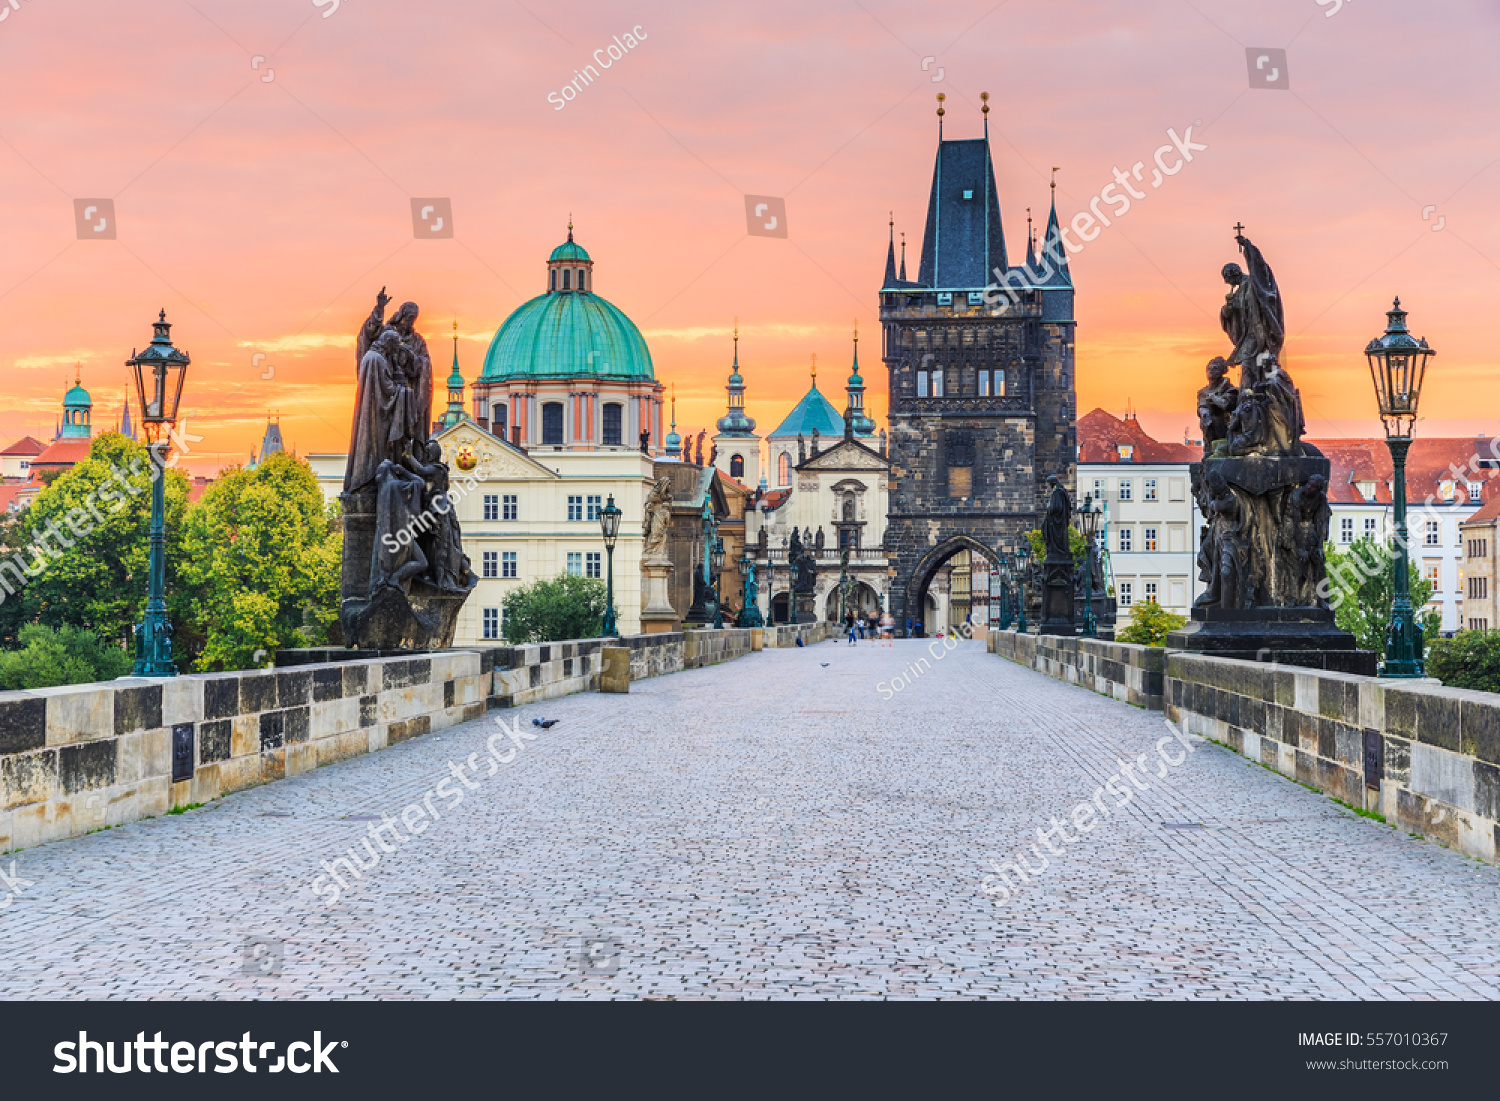 Prague, Czech Republic. Charles Bridge (Karluv Most) and Old Town Tower at sunrise. #557010367